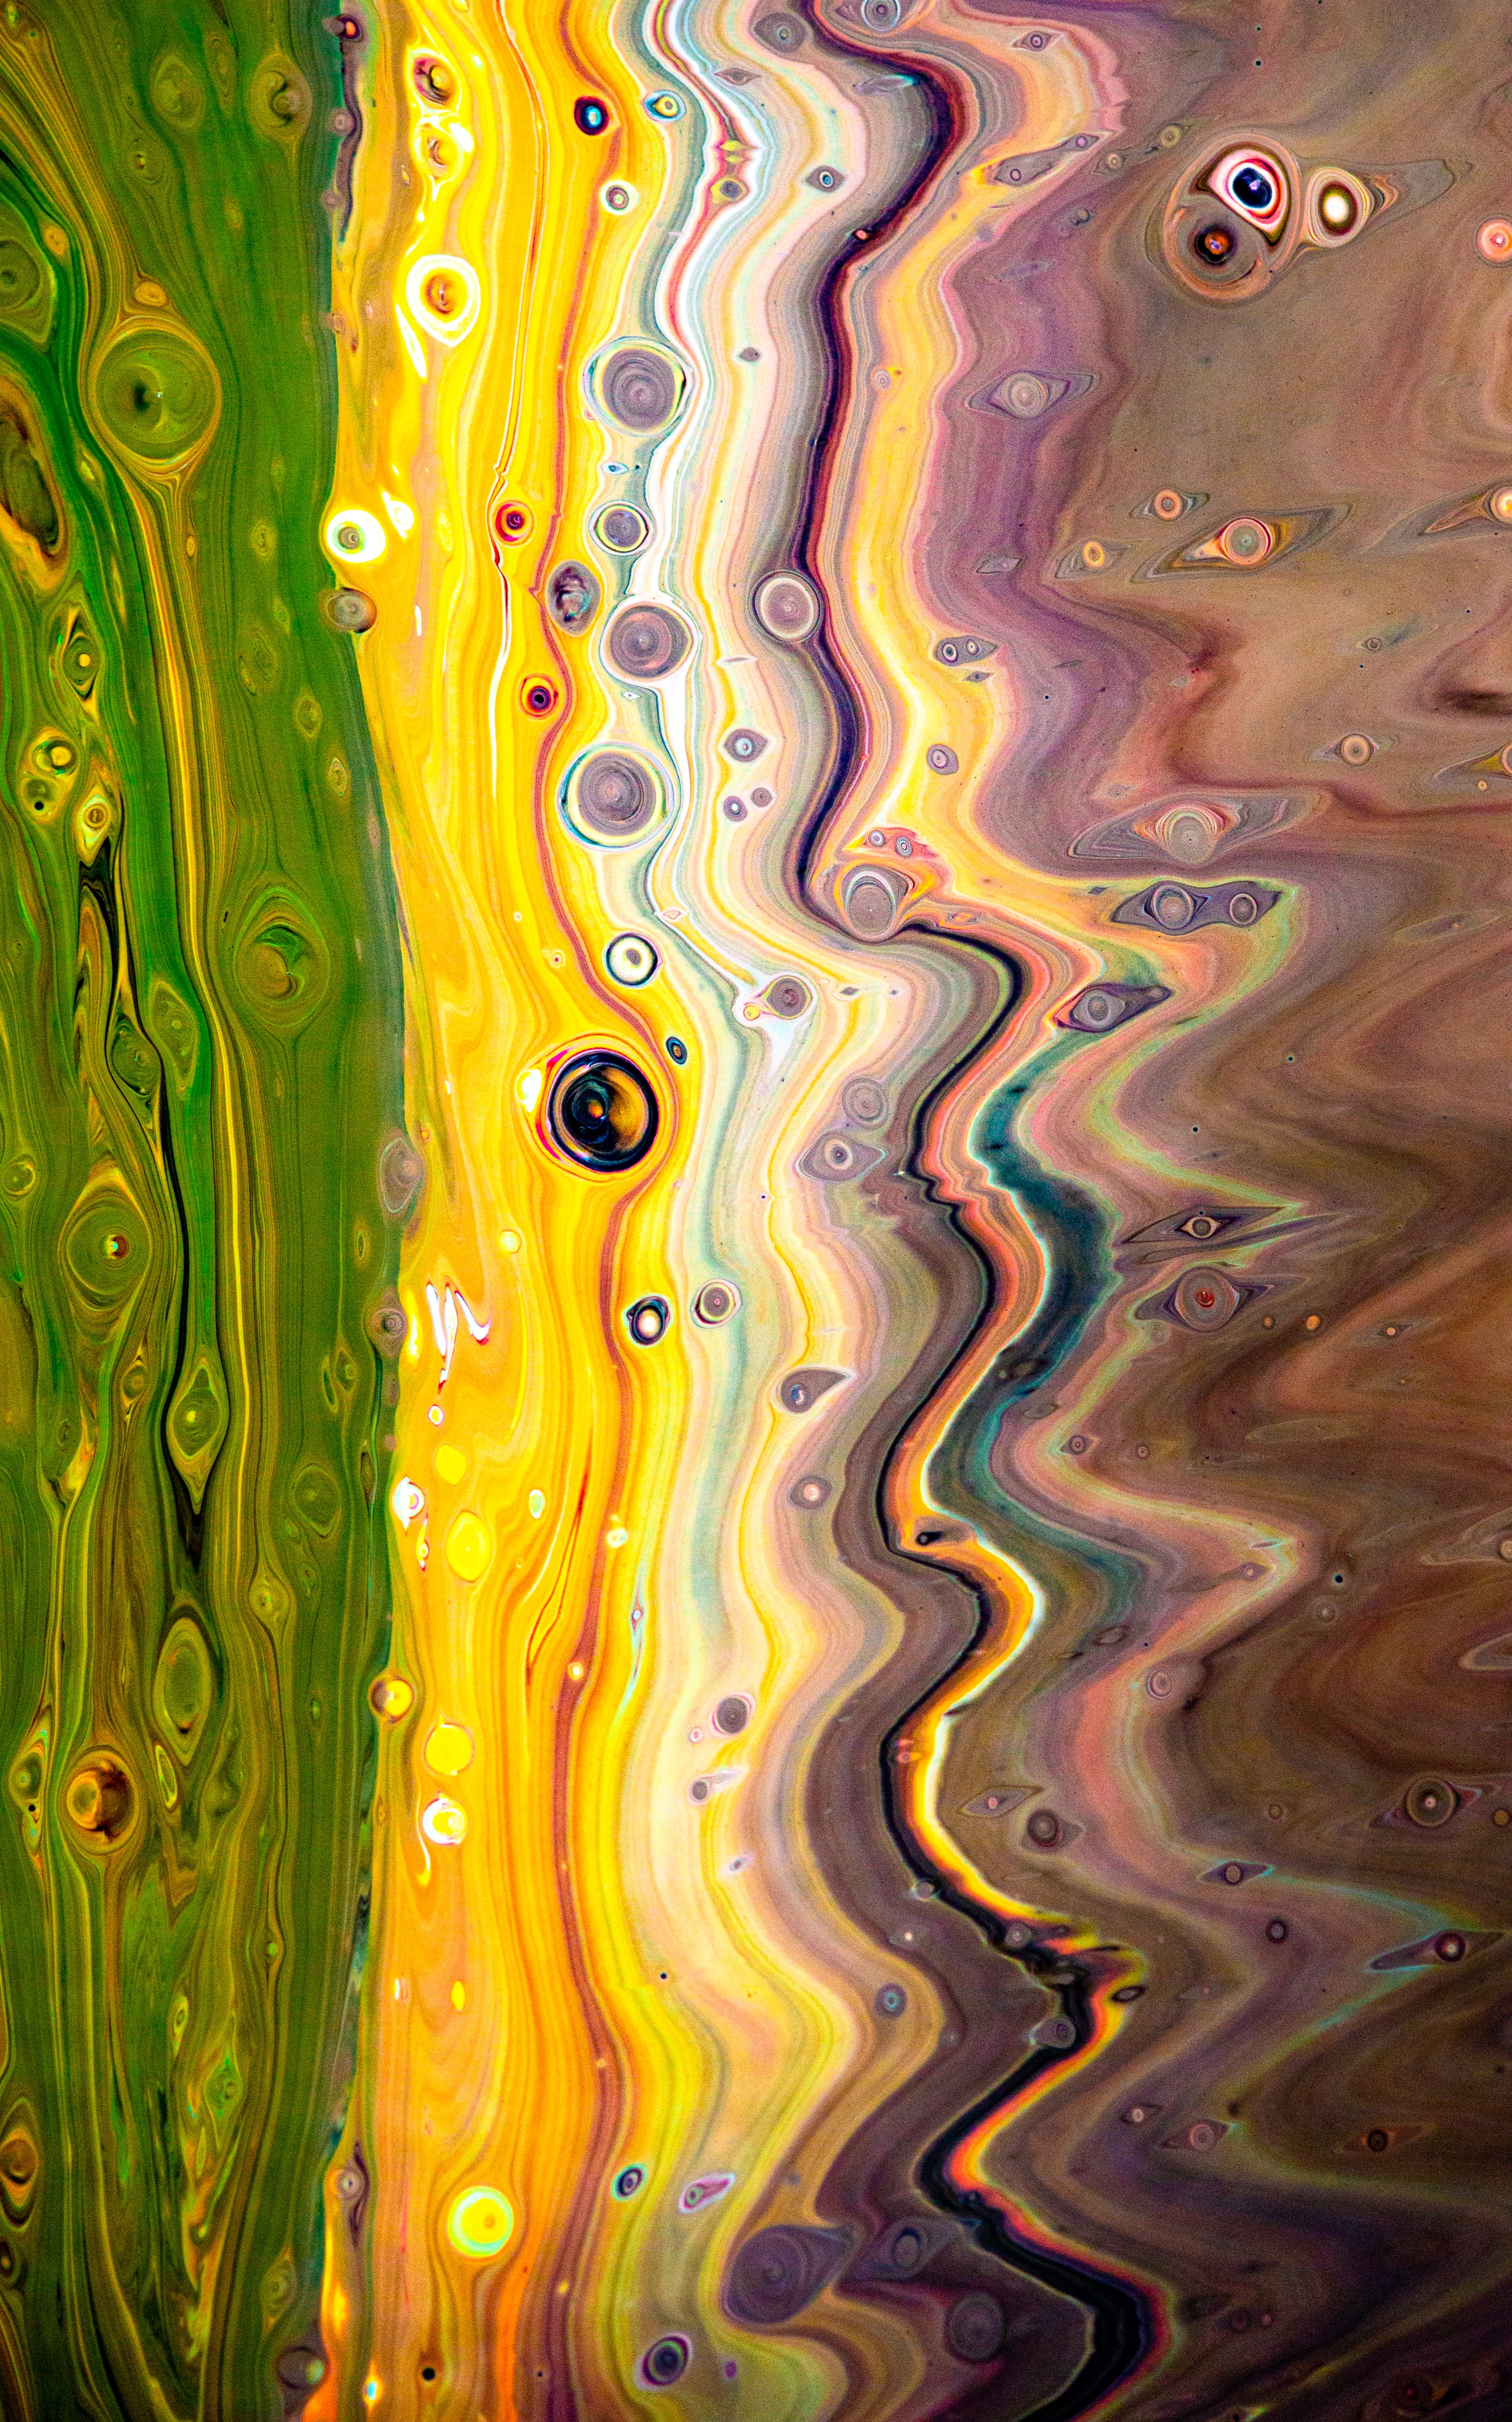 liquid, mixing, abstract, divorces, multicolored, motley, paint High Definition image